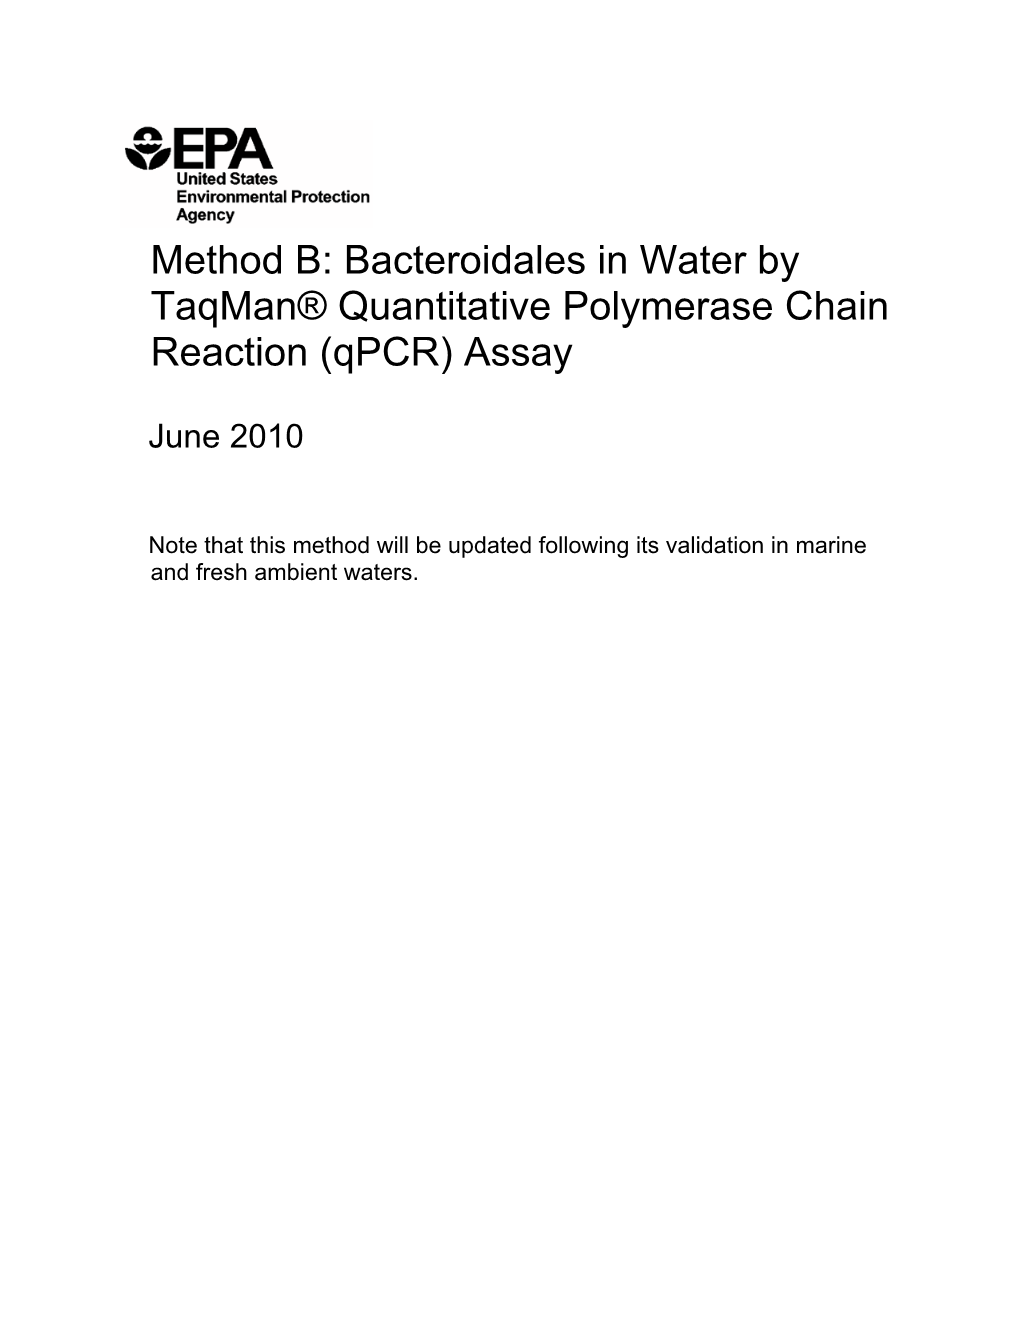 Method B: Bacteroidales in Water by Taqman® Quantitative Polymerase Chain Reaction (Qpcr) Assay